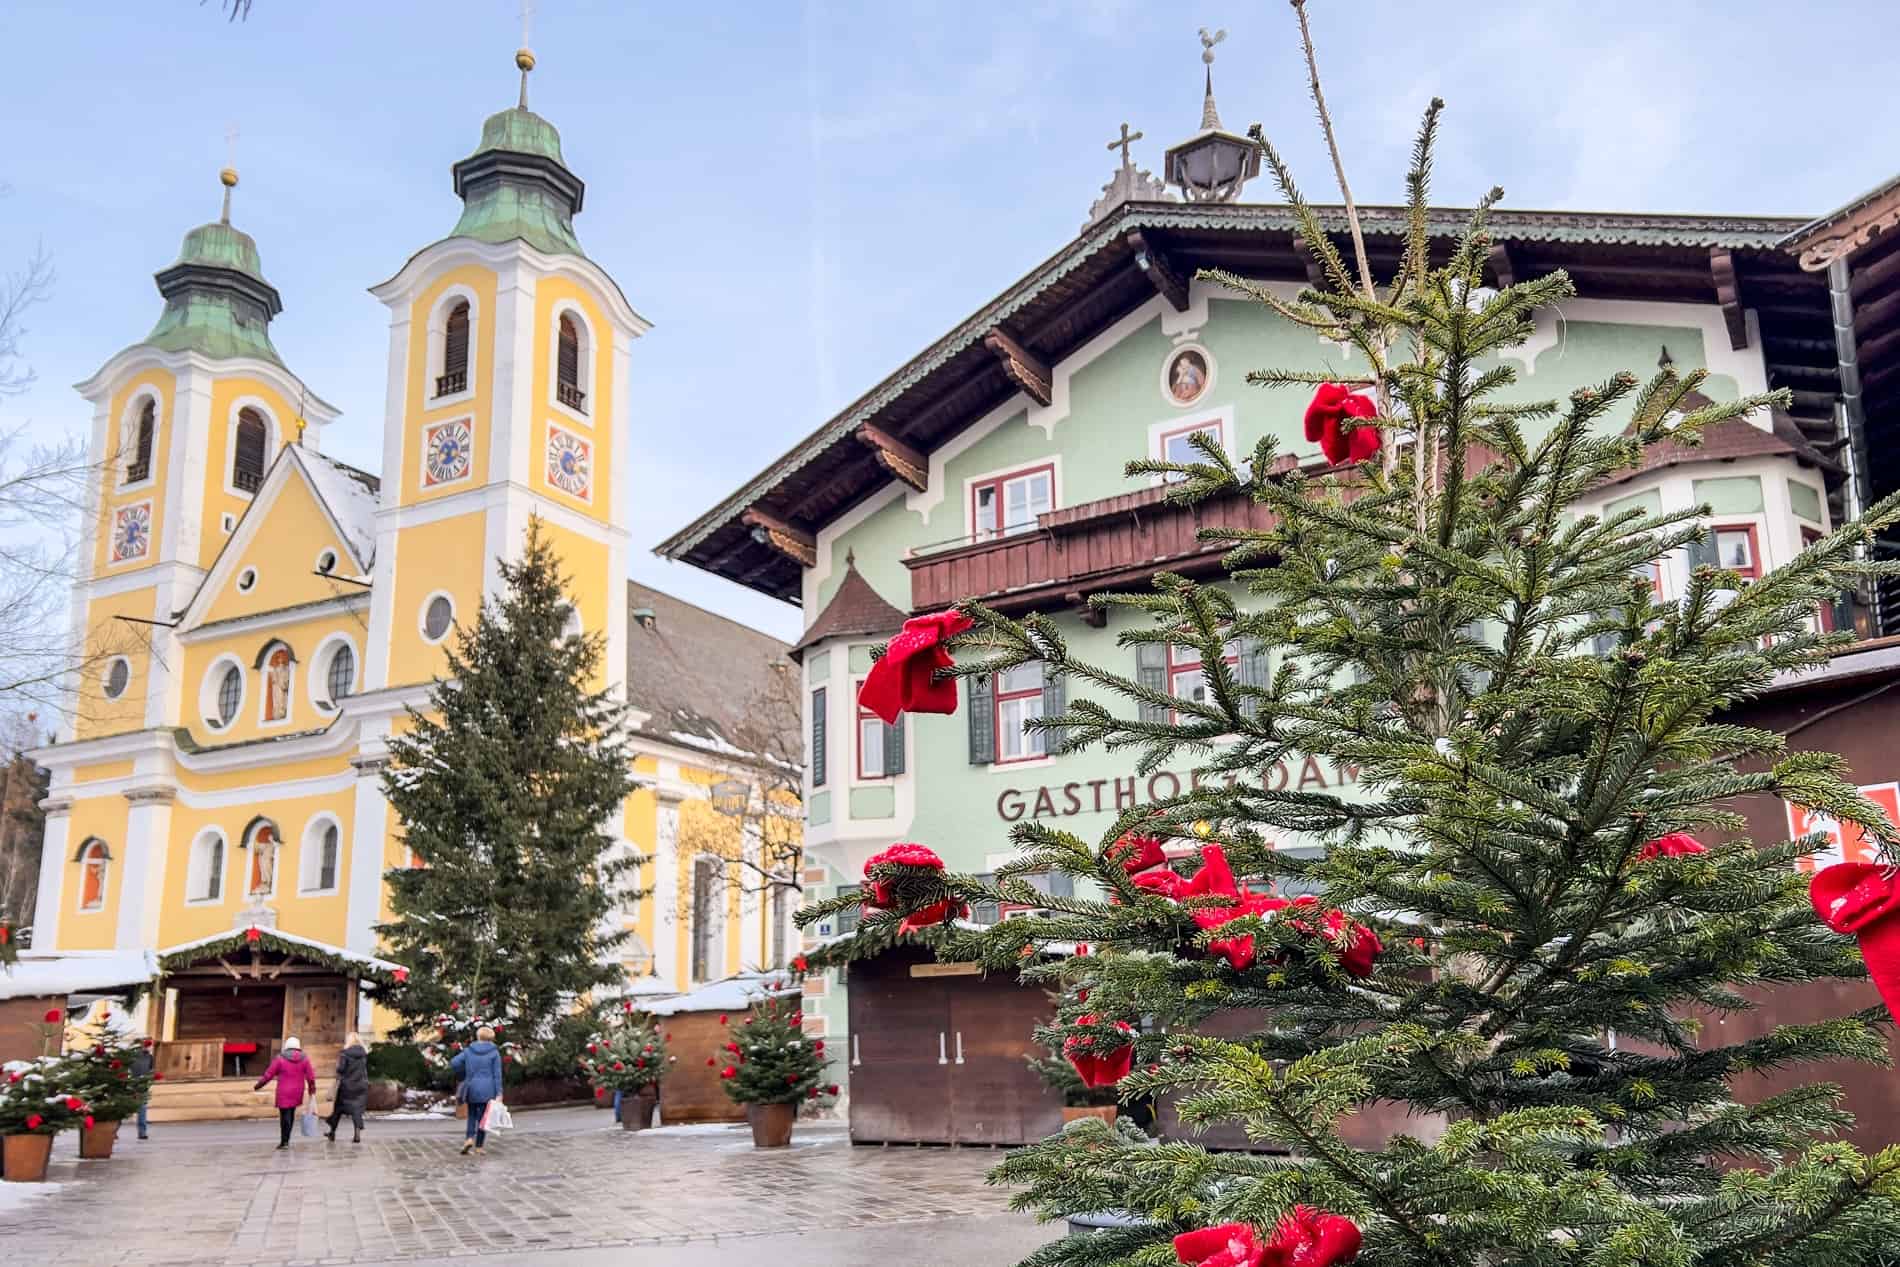 The yellow church and mint green guest house in the main square of St. Johann in Tirol town at Christmas. 